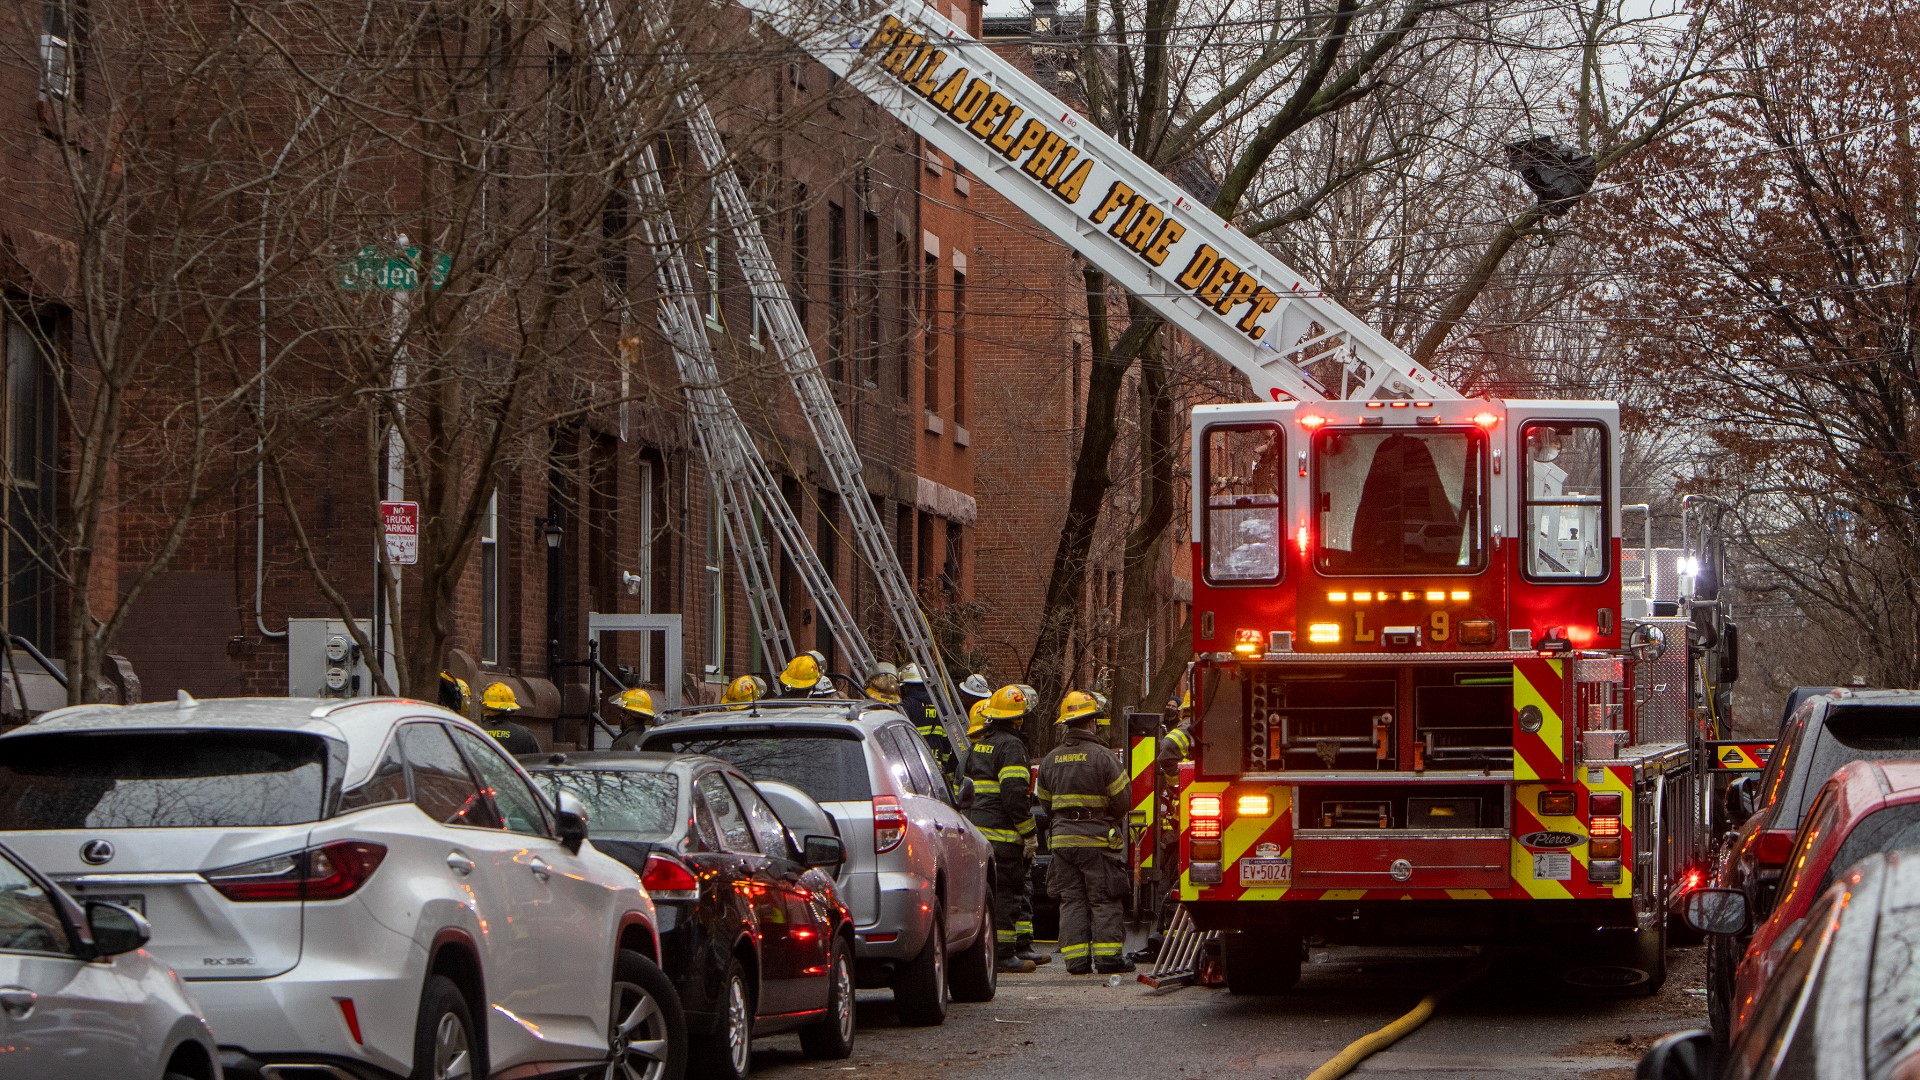 Officials say the fire is Philadelphia's deadliest single fire in at least a century.